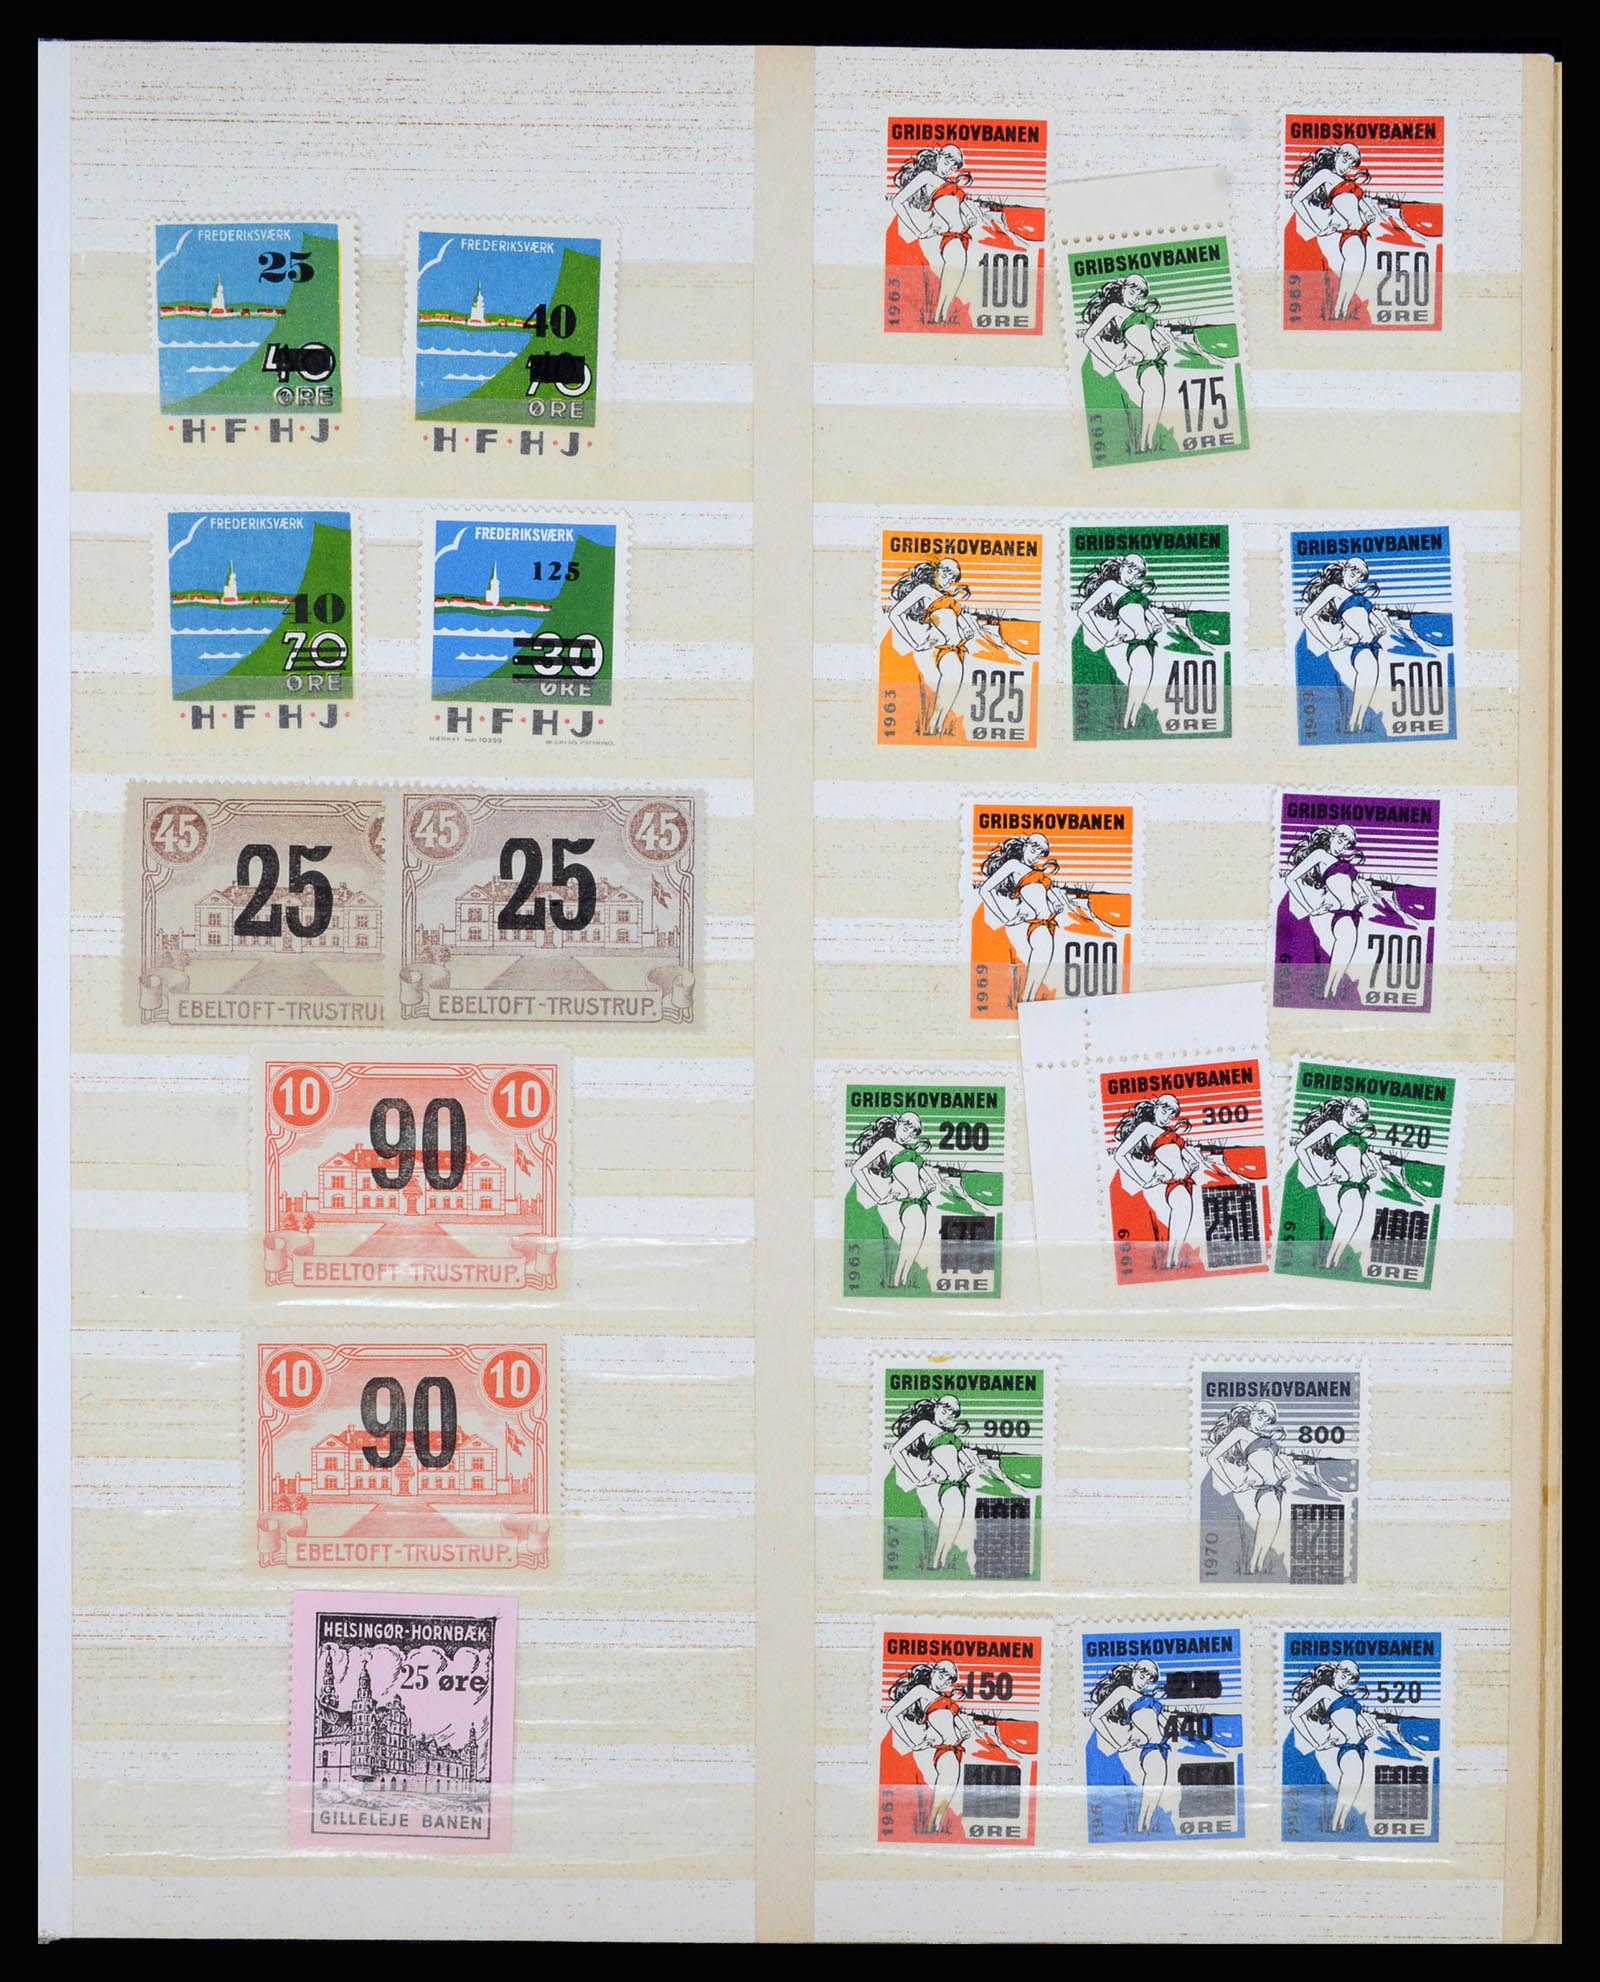 36767 003 - Stamp collection 36767 Denmark railroadstamps.